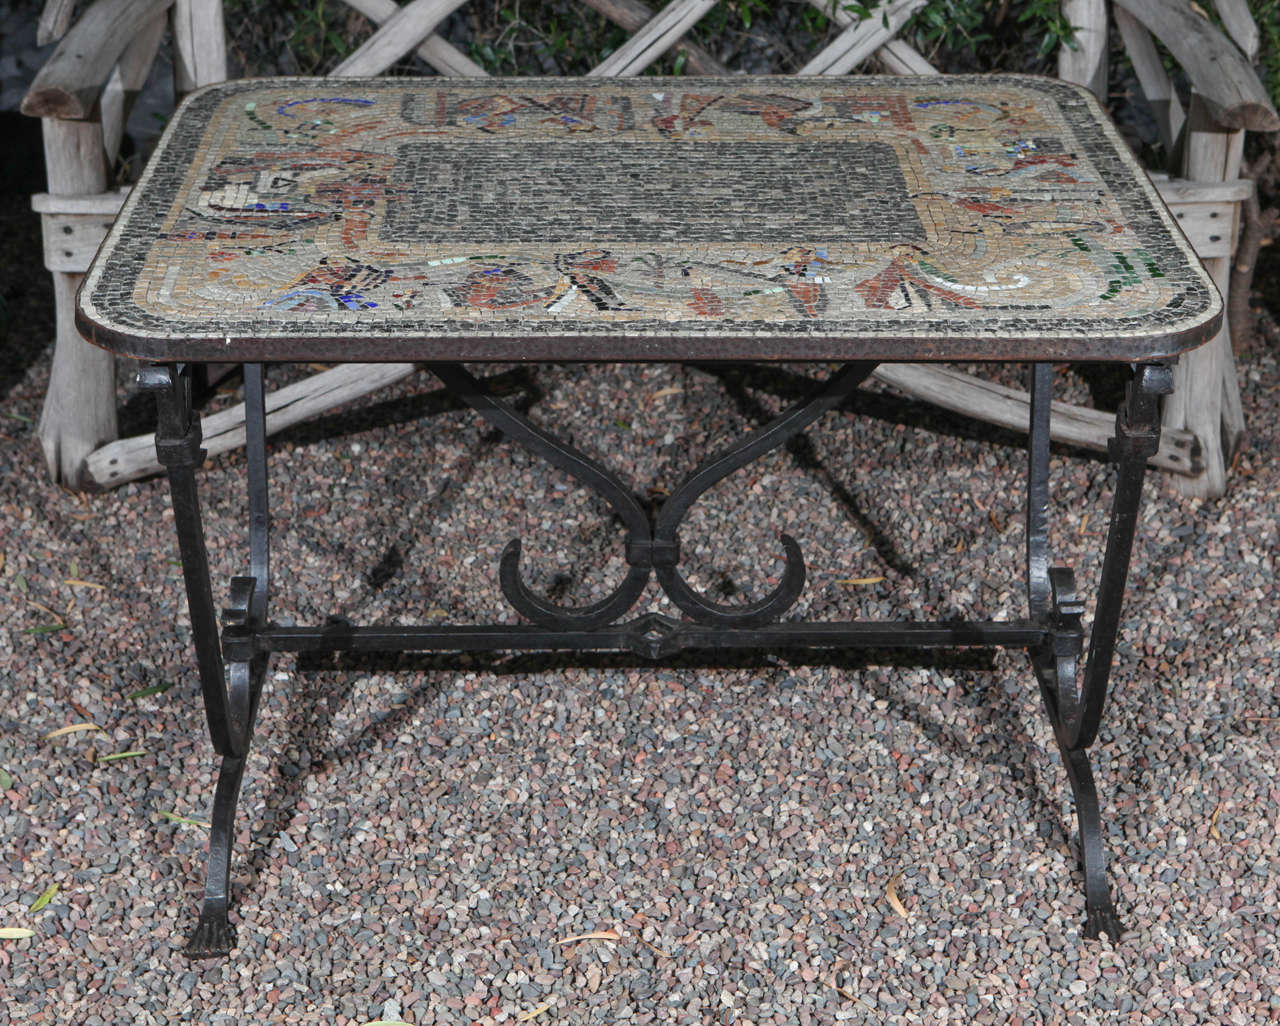 Early 20th century iron table with mosaic stone top from England. 